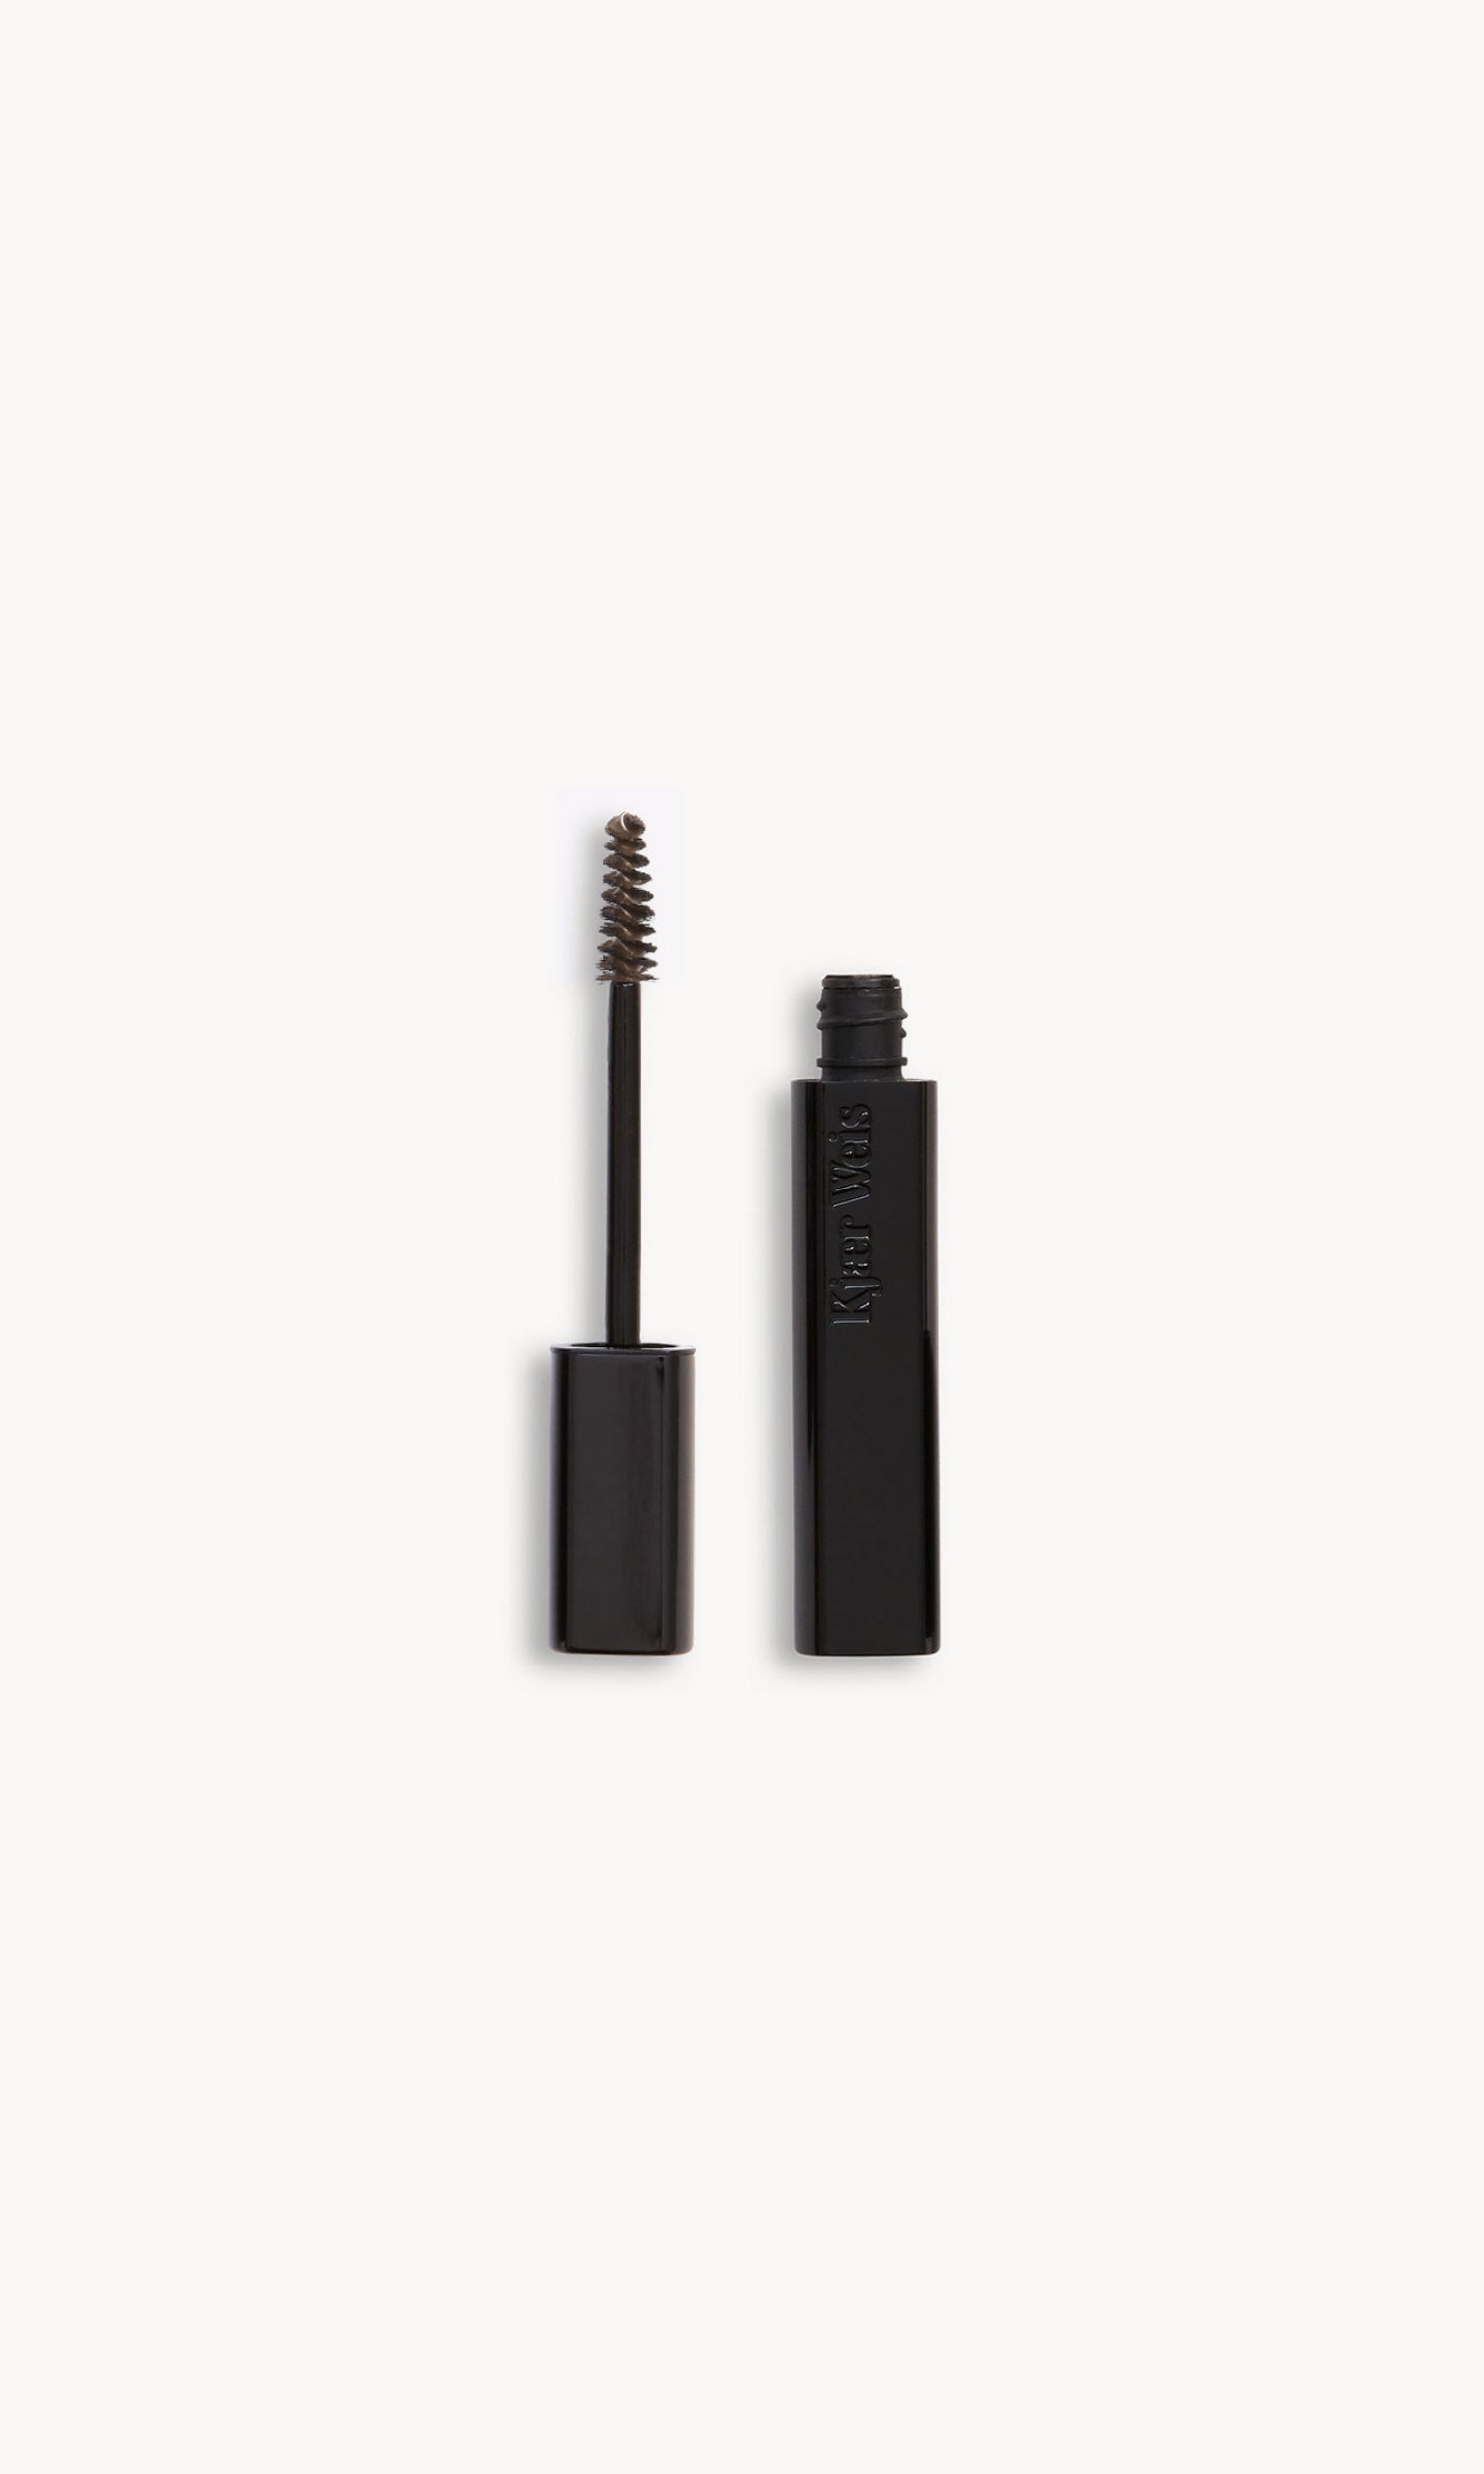 Kjaer Weis brow gel wand and bottle side by side, with a medium shade of brown product on the wand